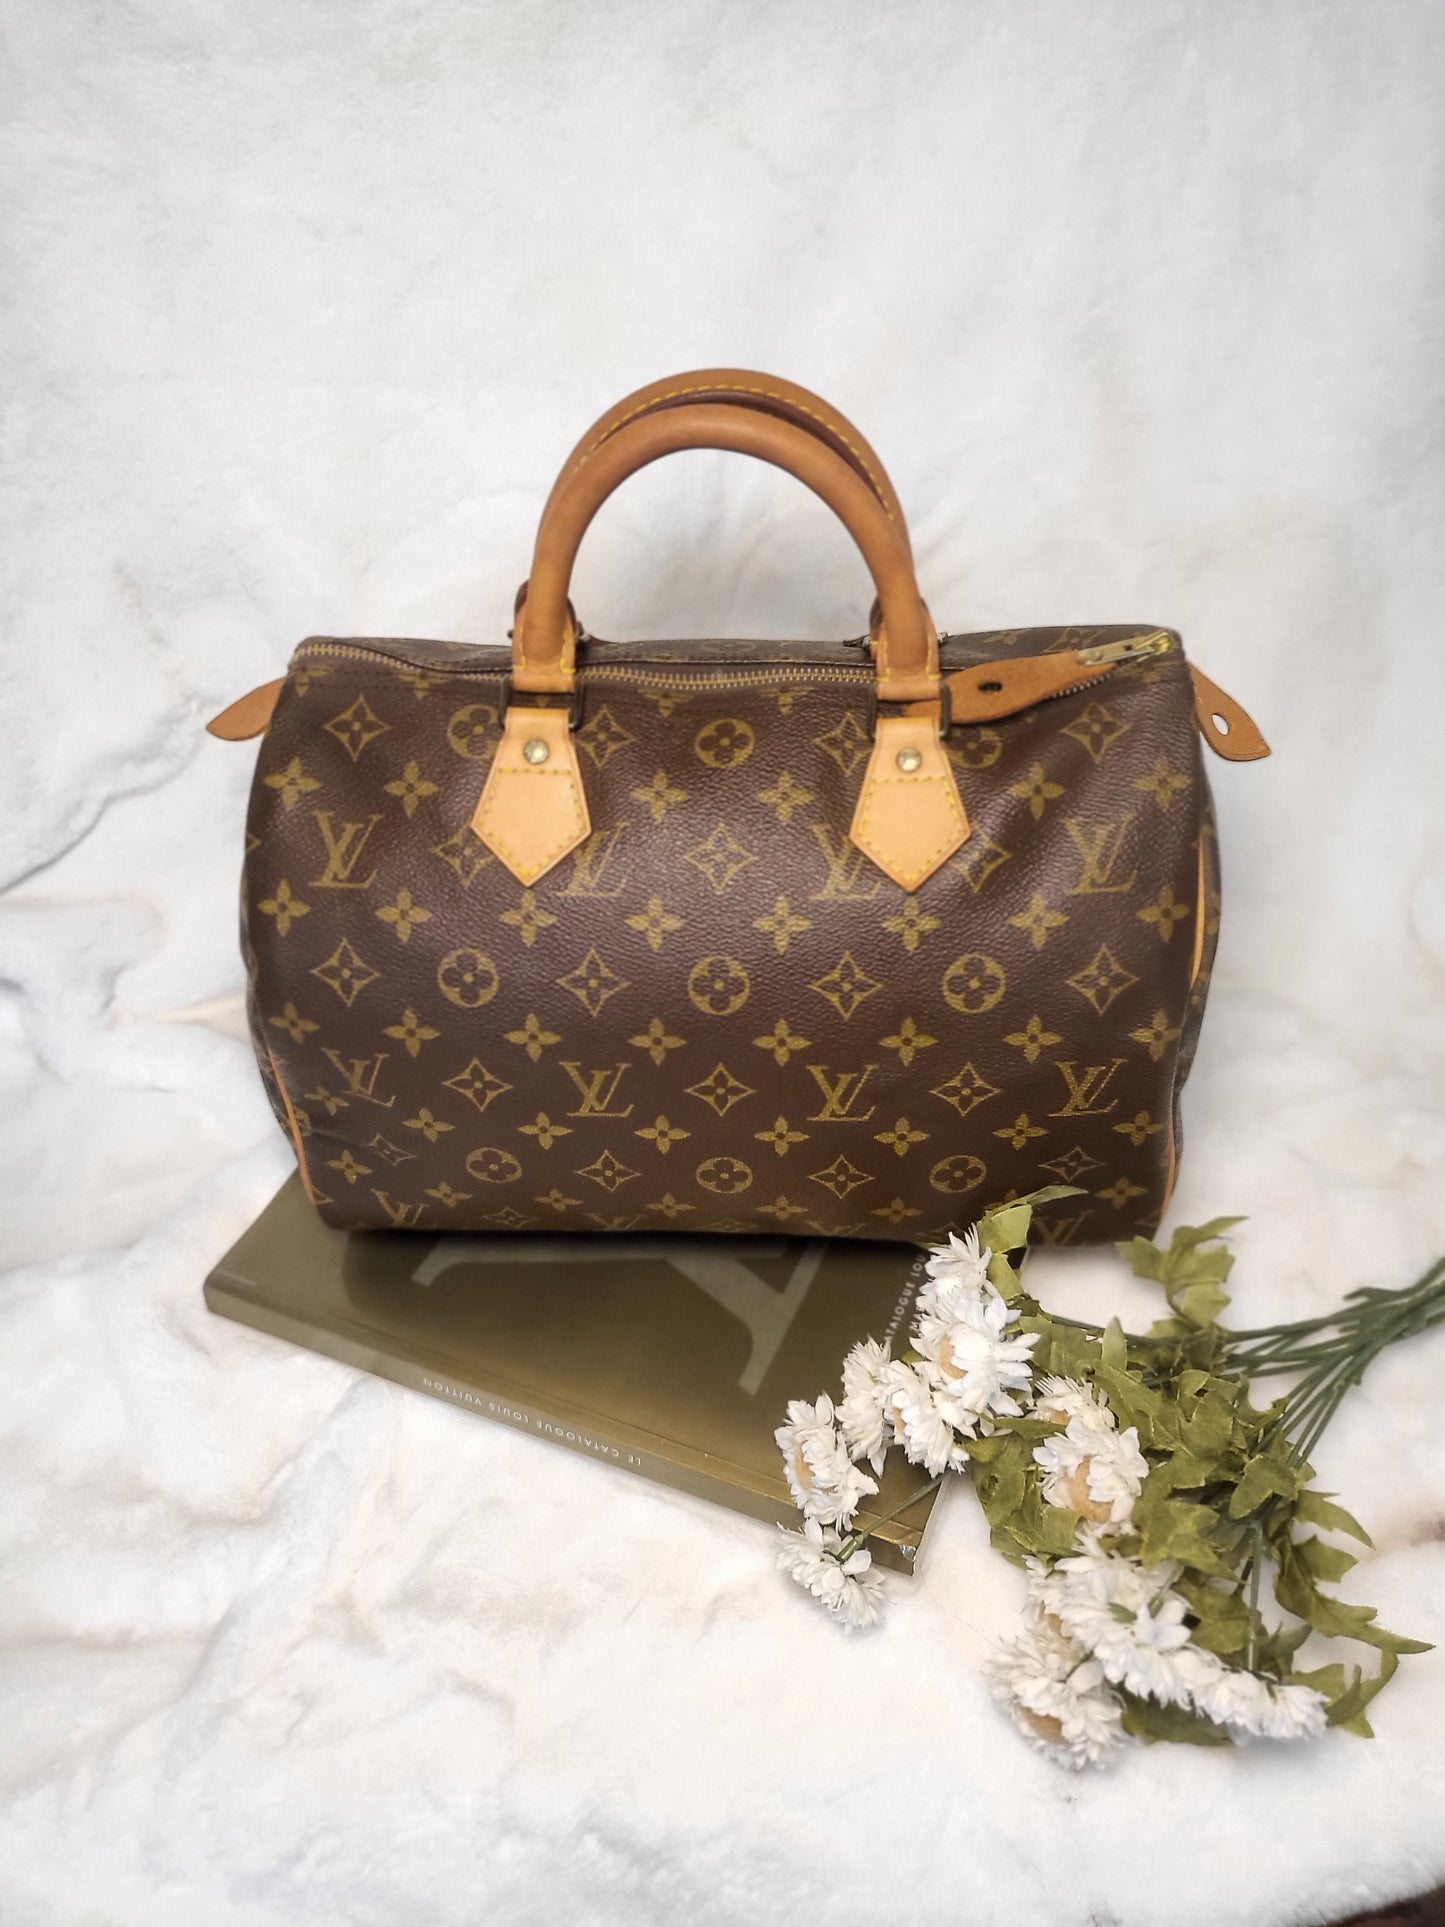 Authentic pre-owned Louis Vuitton speedy 30